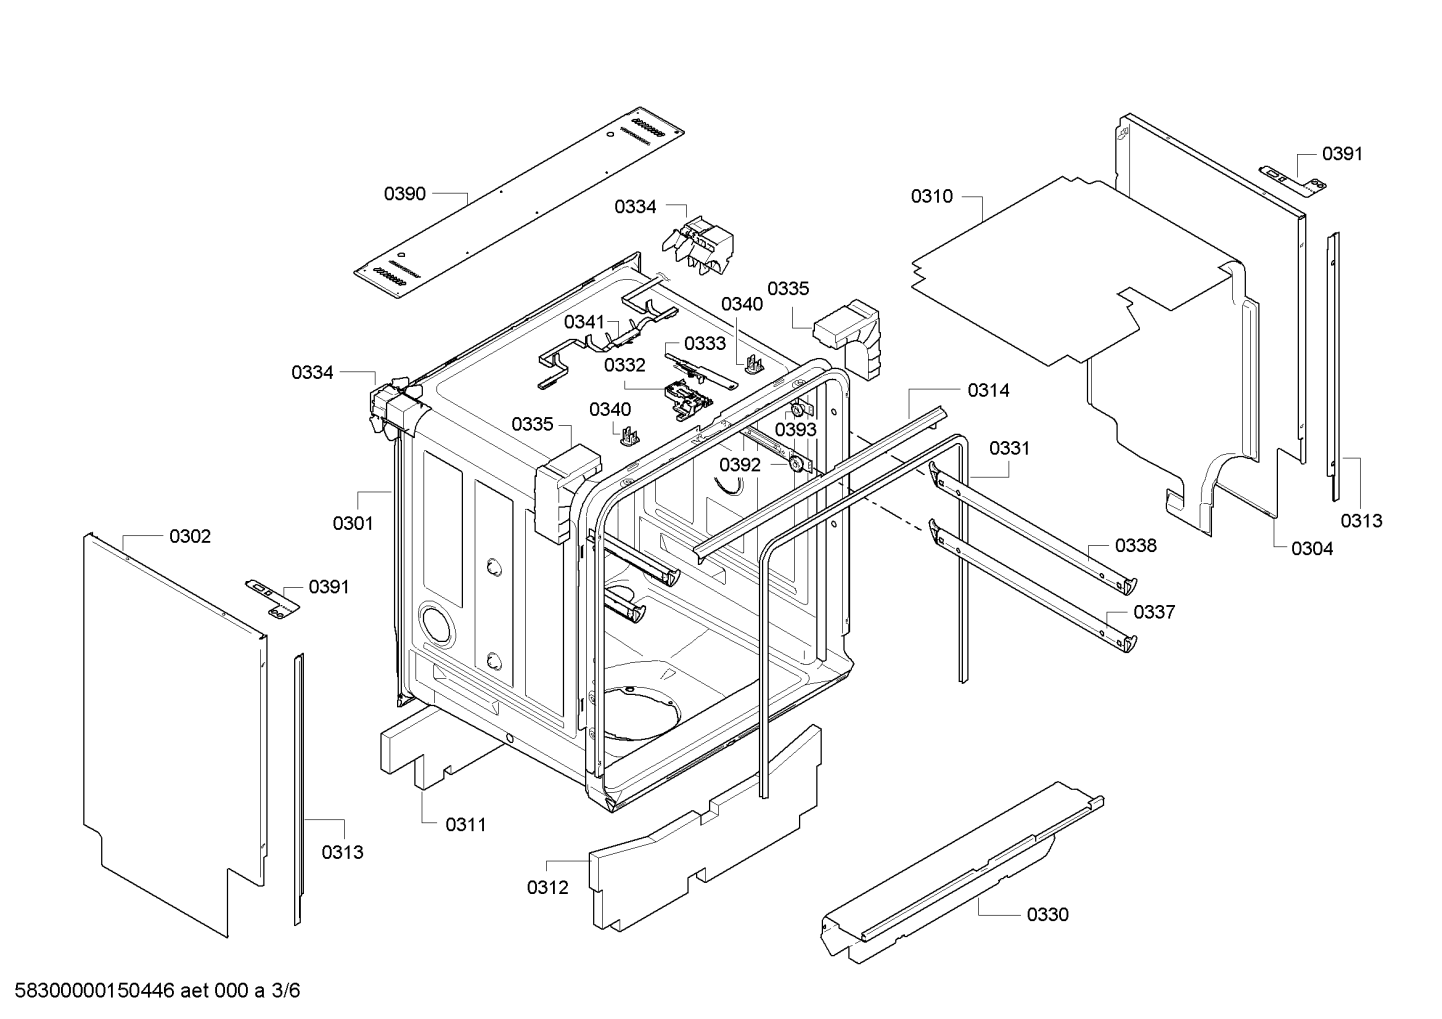 drawing_link_3_device_1575850